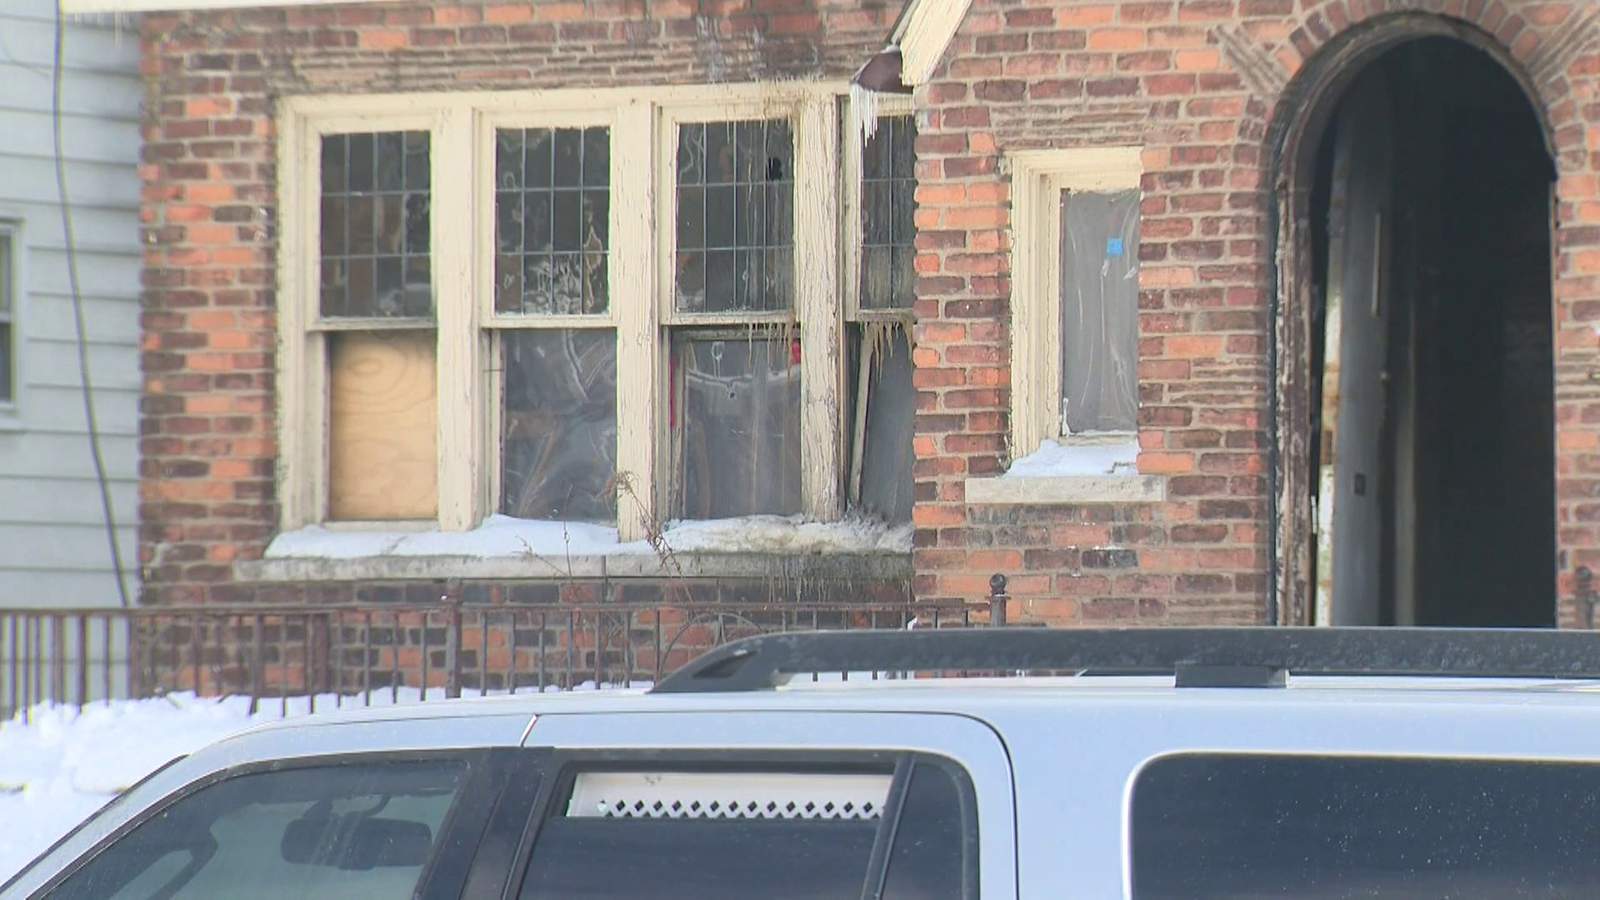 2 killed in Detroit house fire believed to be caused by space heaters